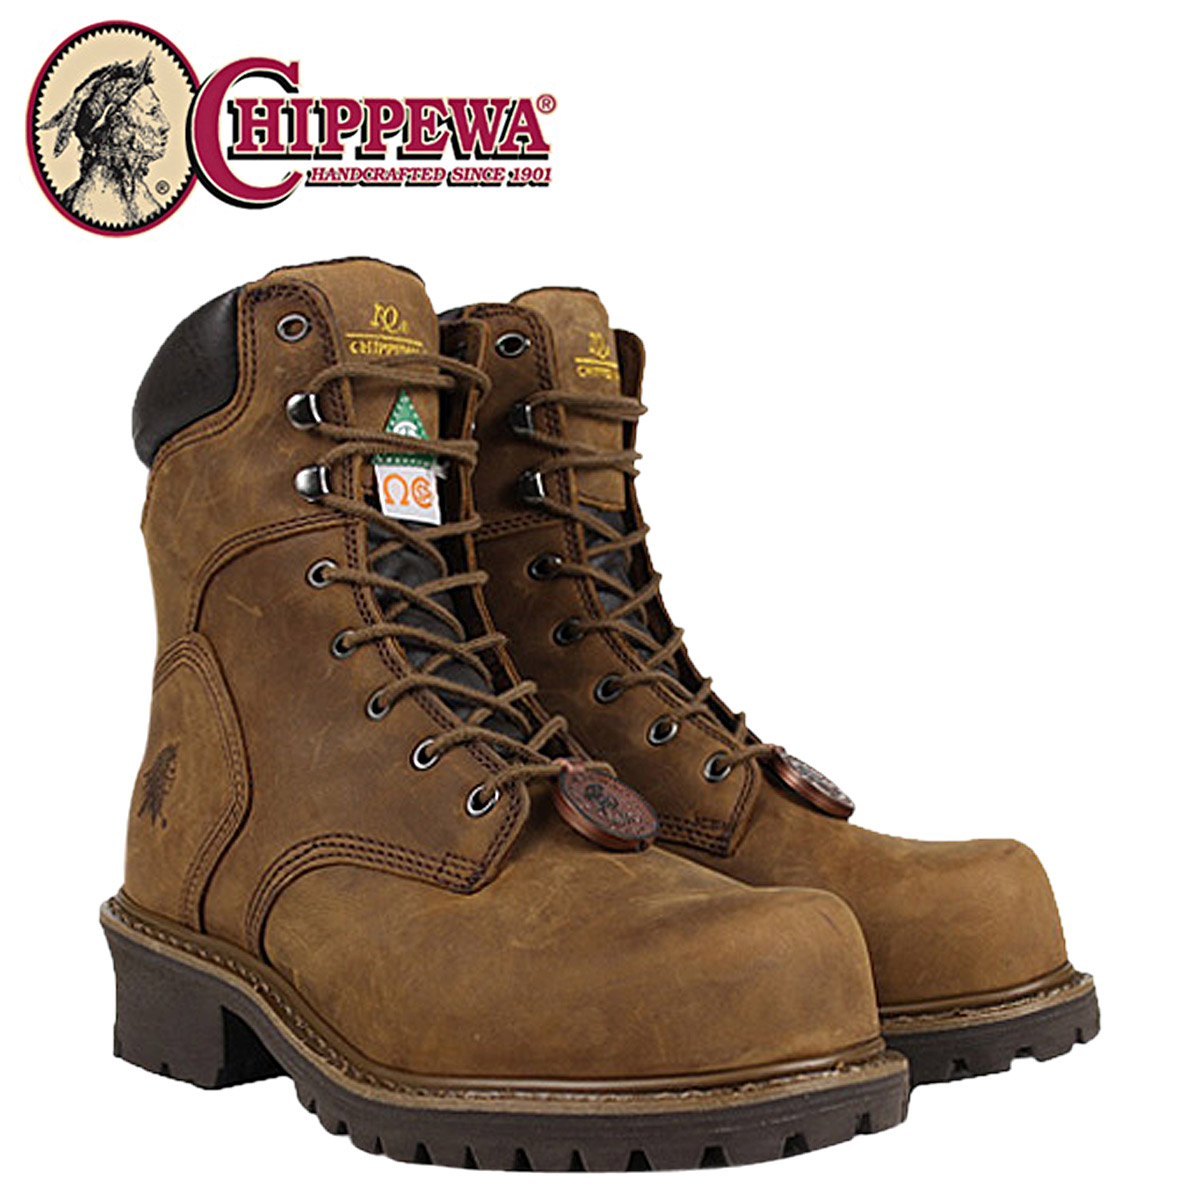 8 inch logger boots cheap online